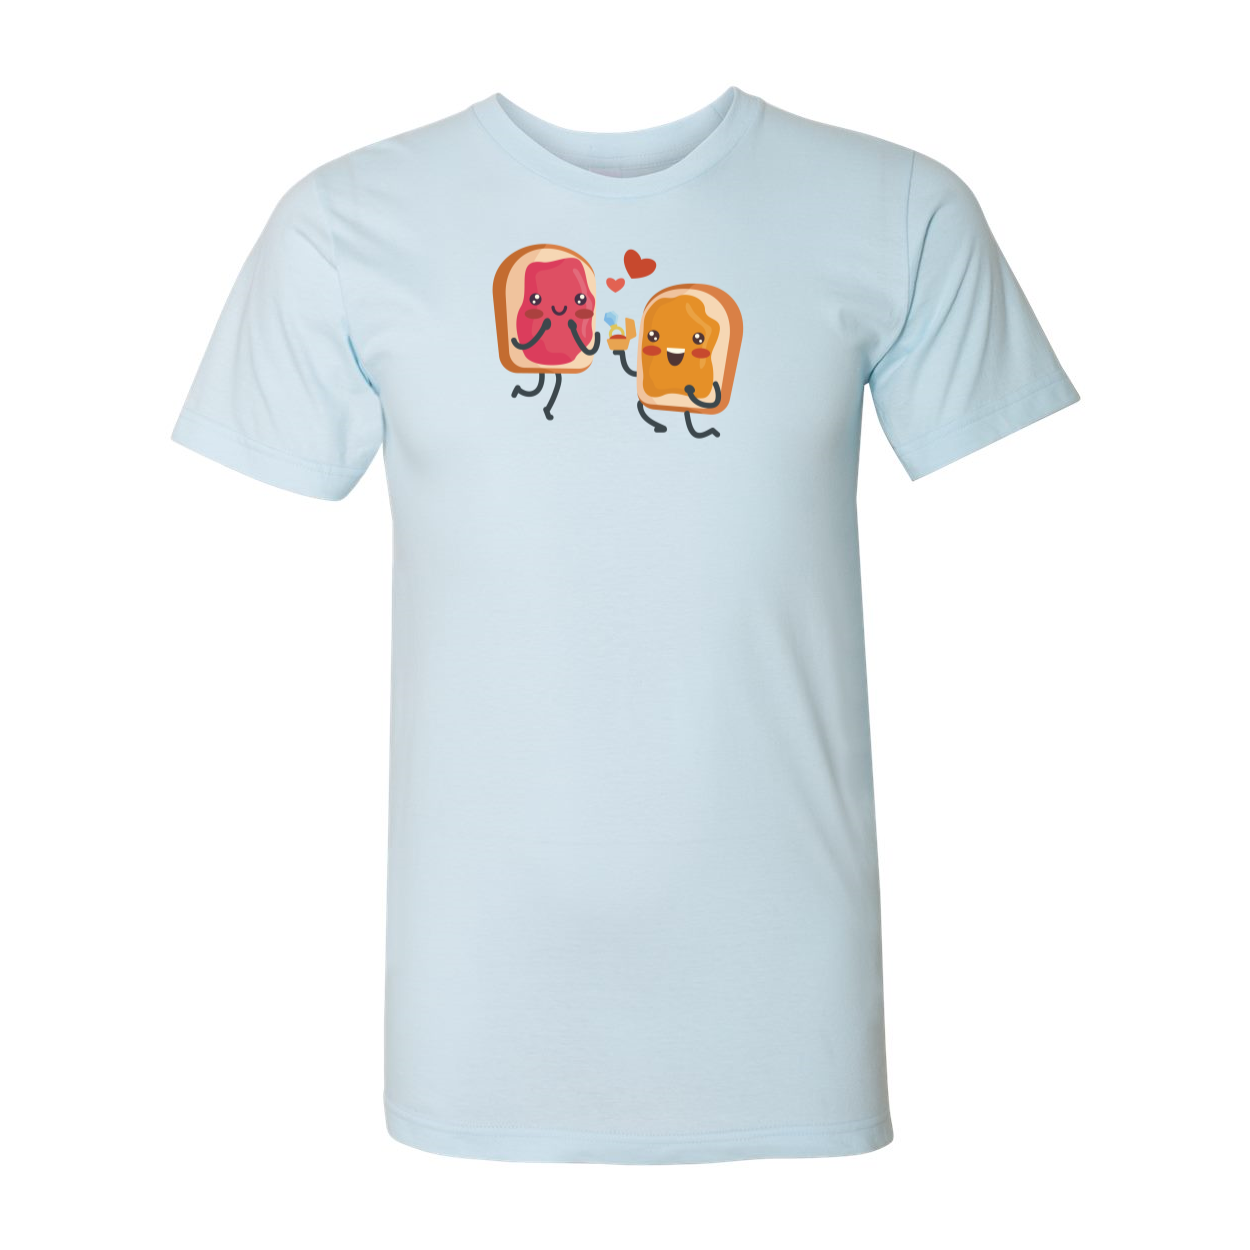 Peanut Butter & Jelly In Love T-Shirt